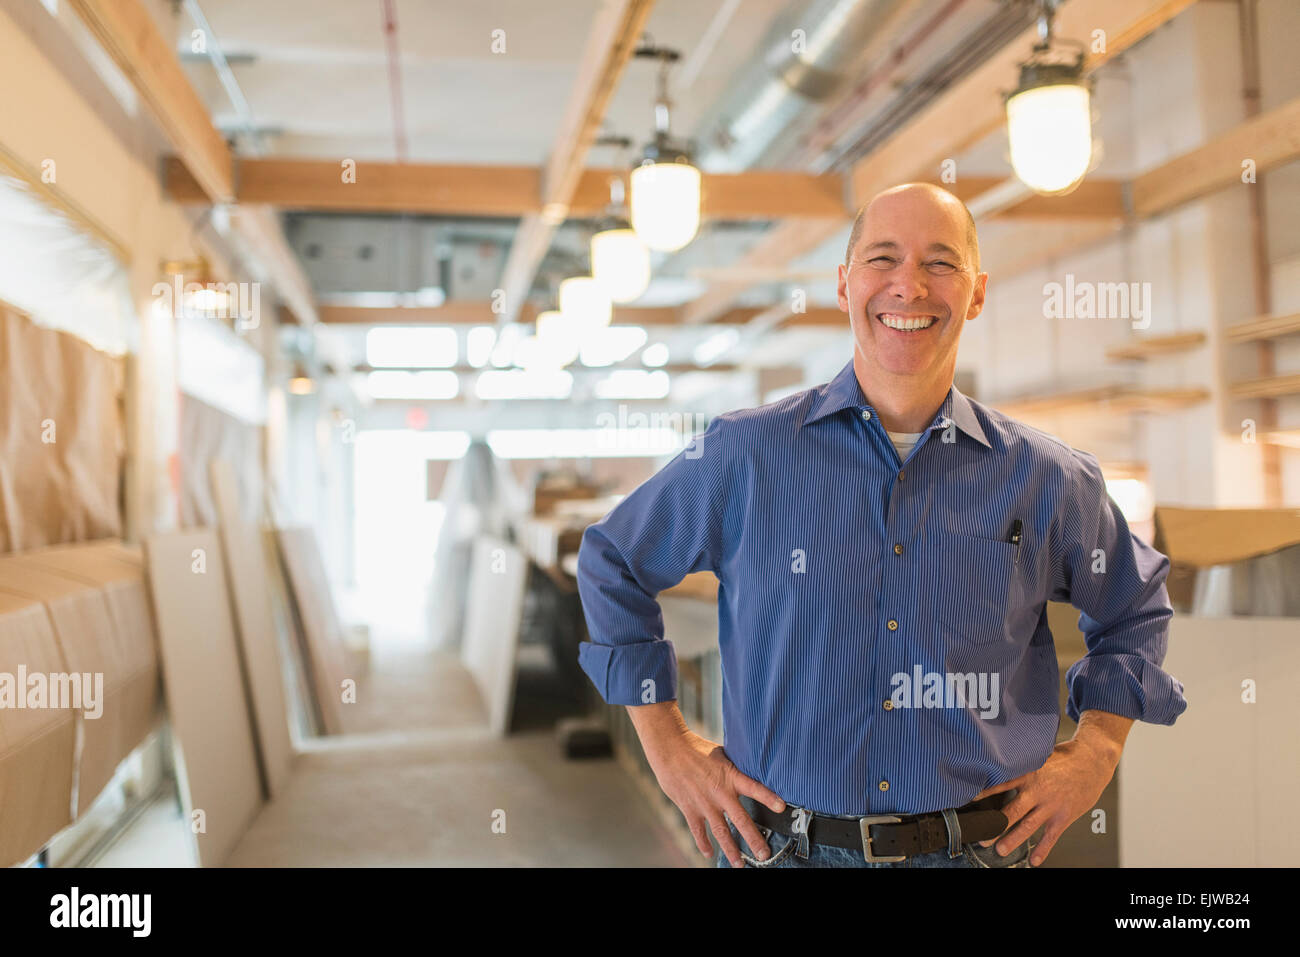 Portrait of smiling business owner Stock Photo